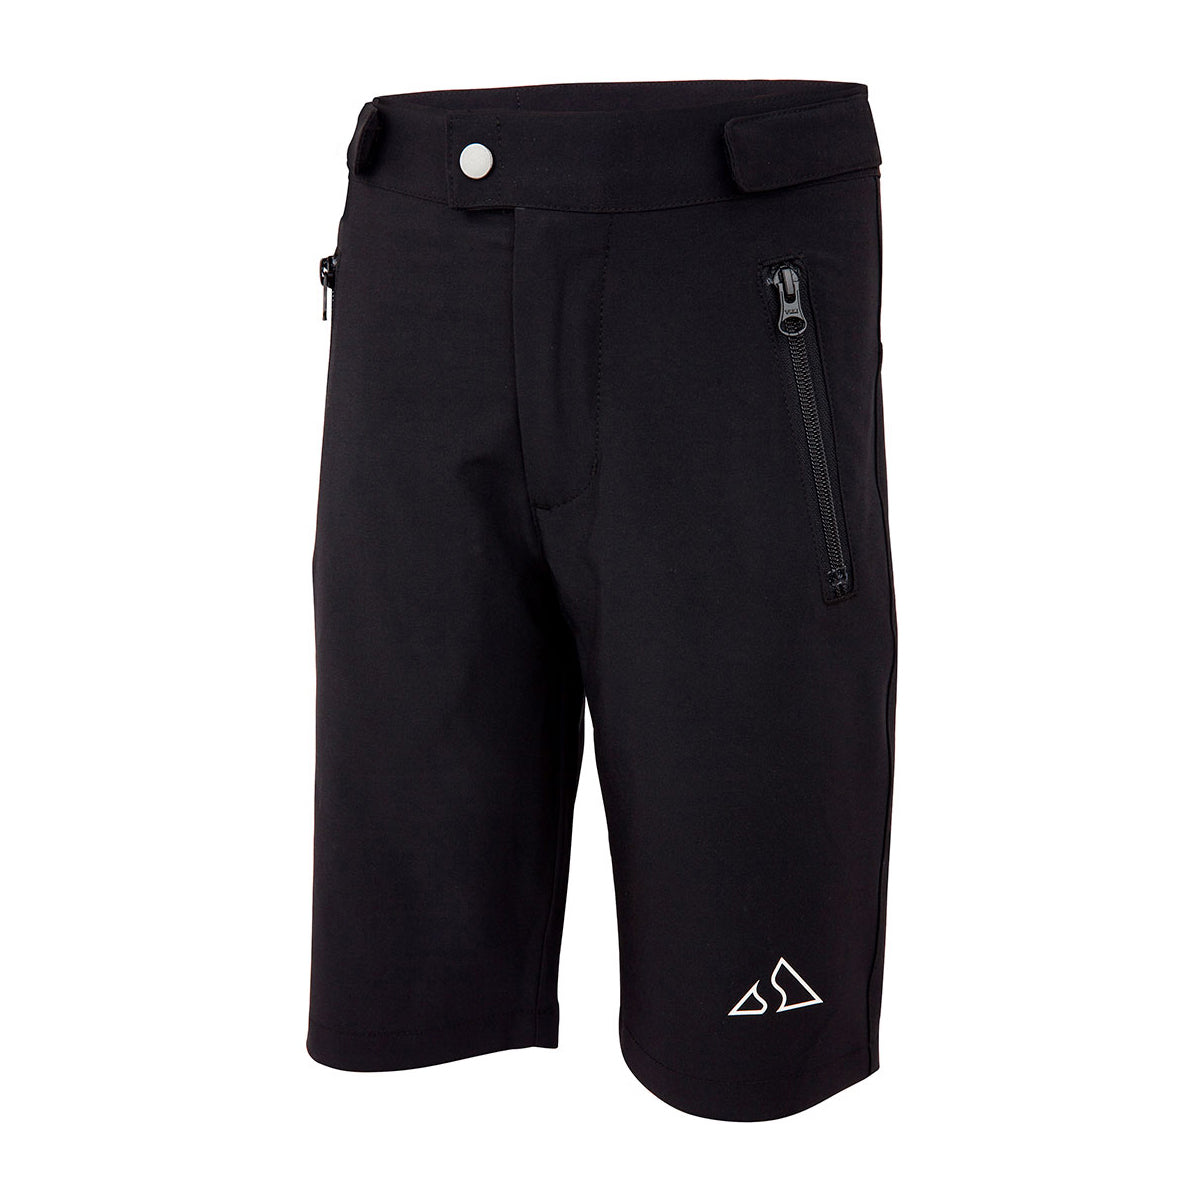 Sendy Send It Youth Shell Shorts - Youth L - Shred Forest